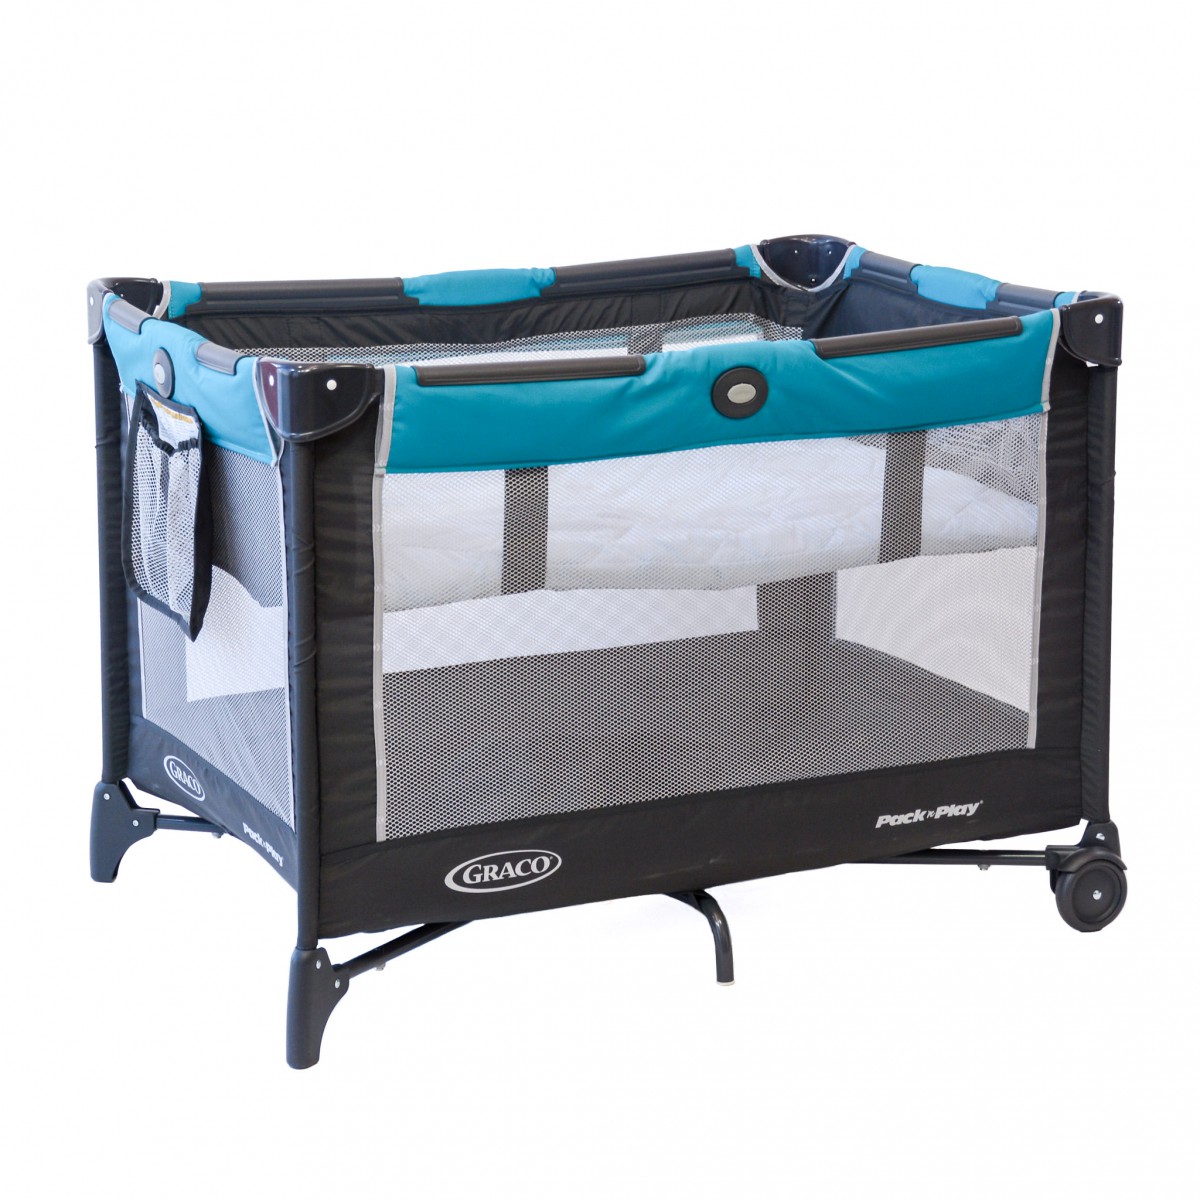 Graco Pack 'n Play On the Go Bassinet Review